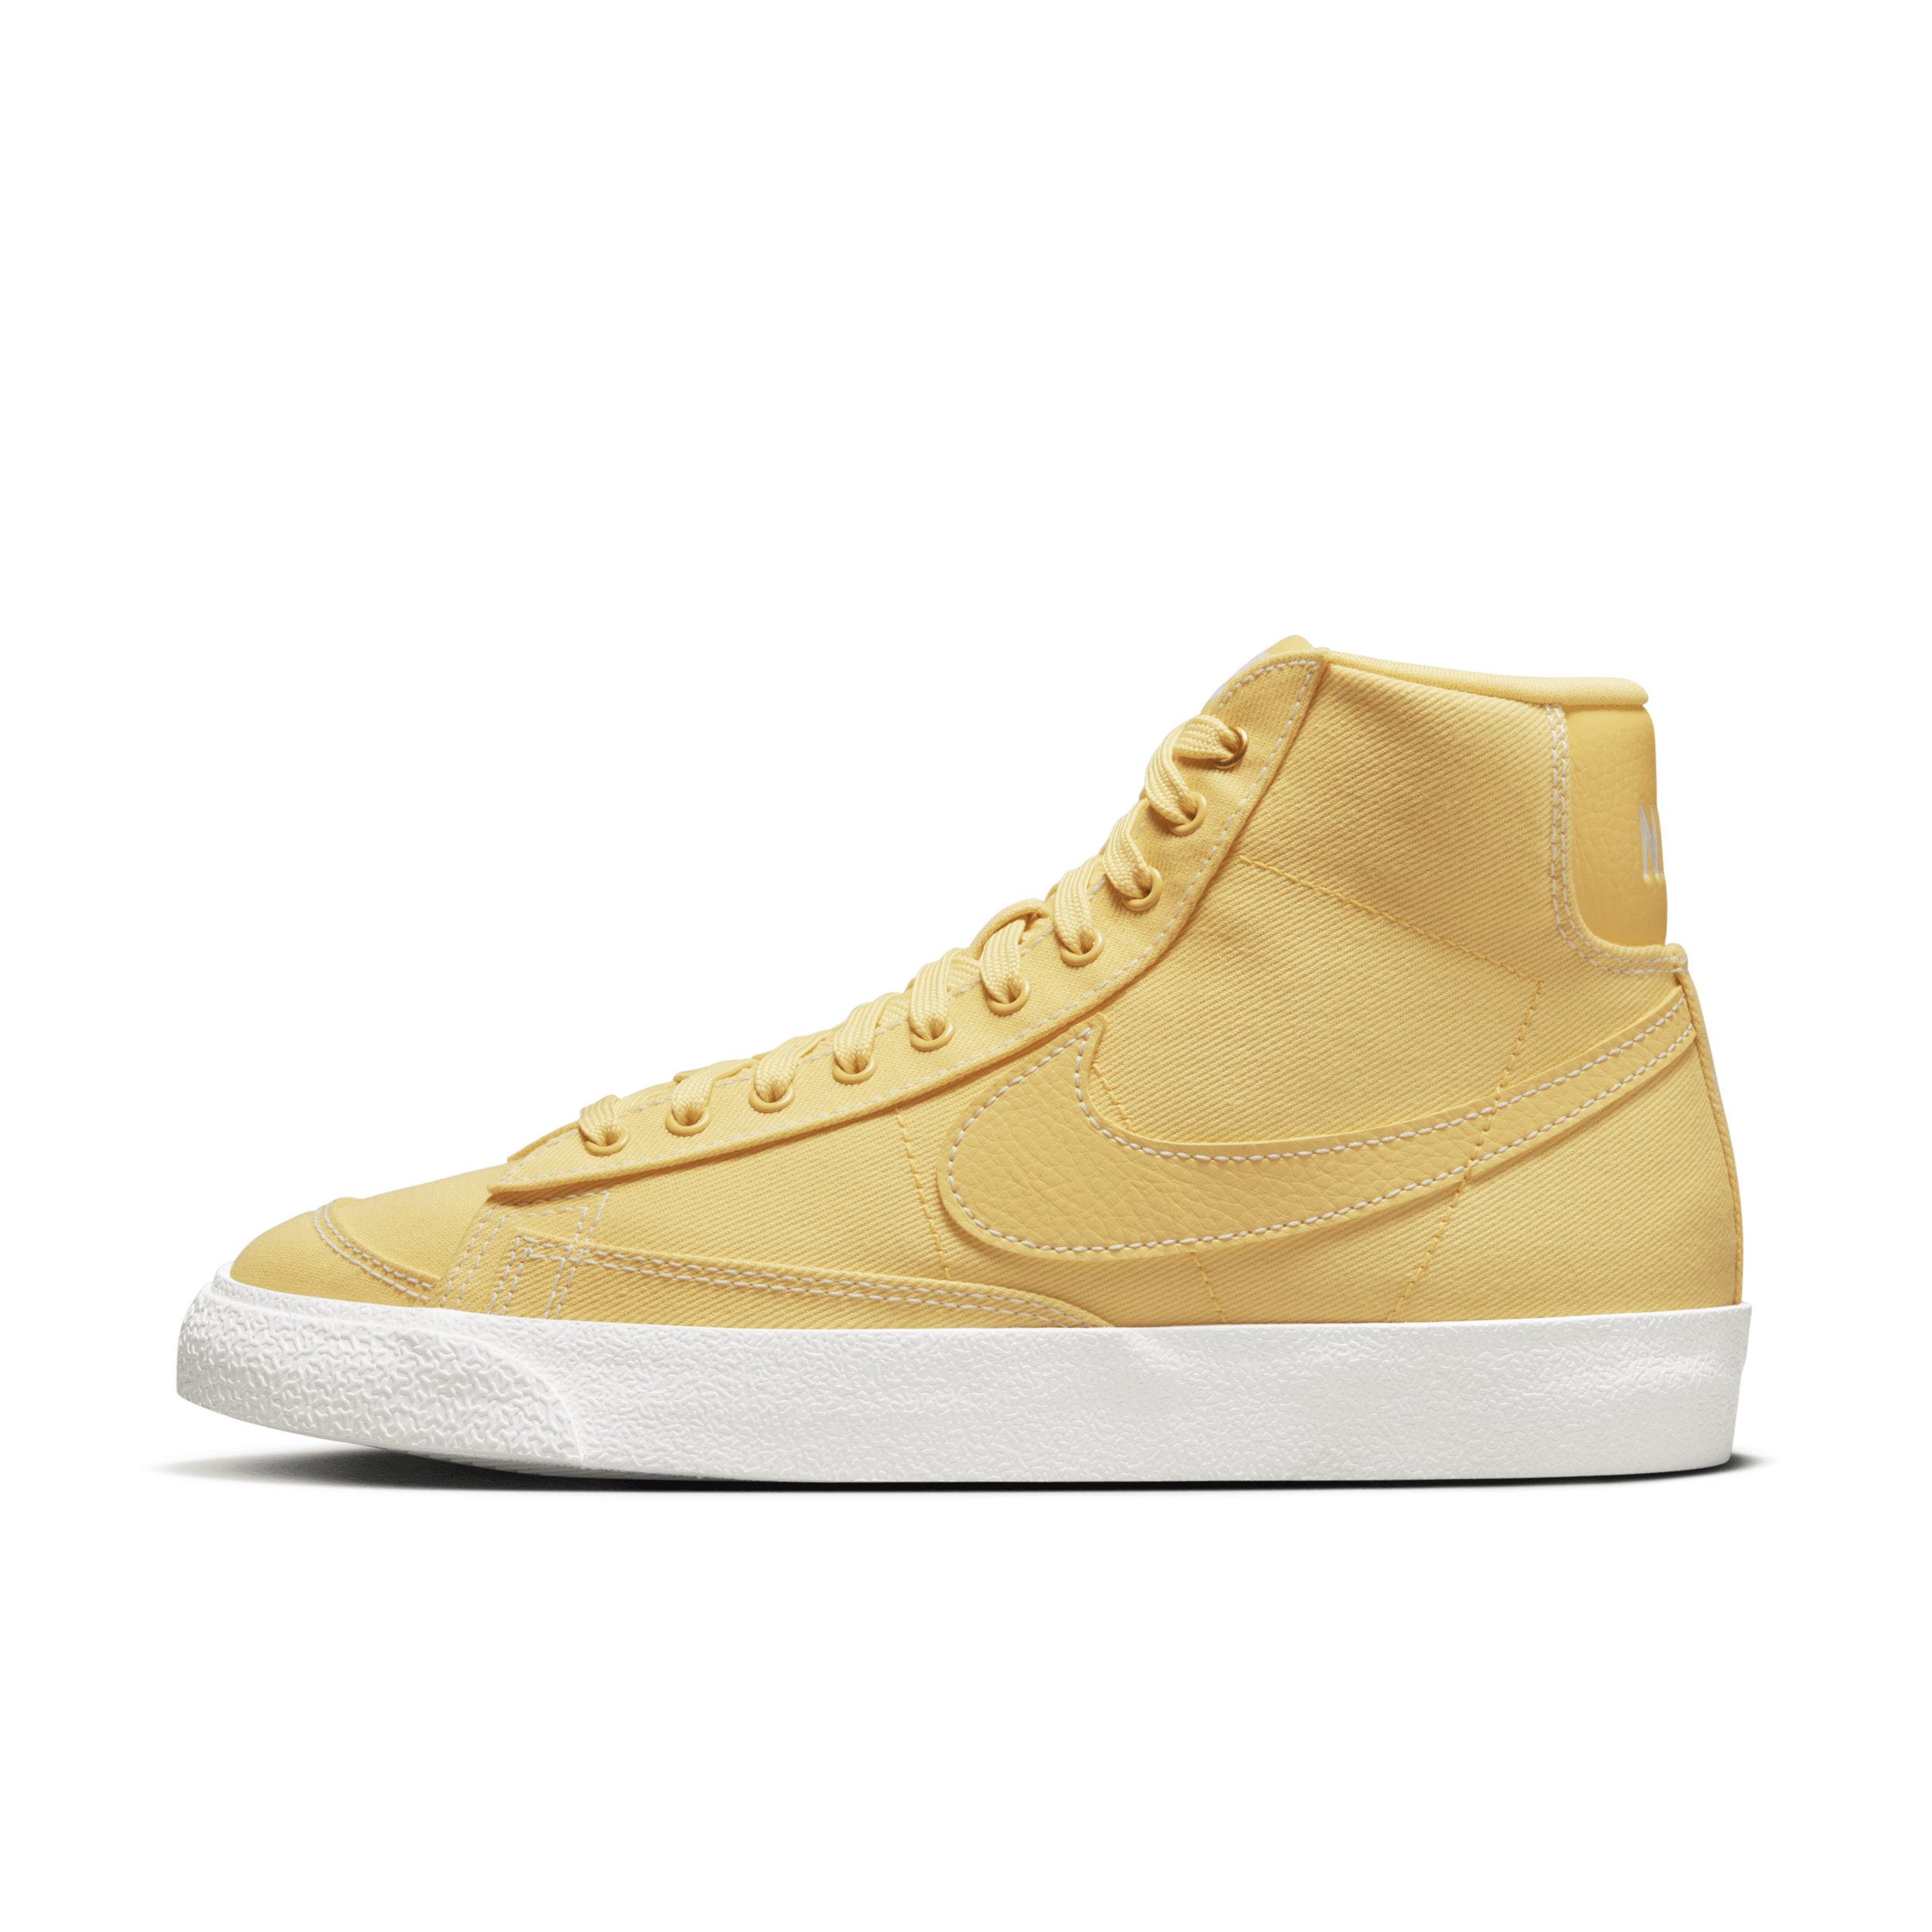 Nike Women's Blazer Mid '77 Canvas Shoes In Brown